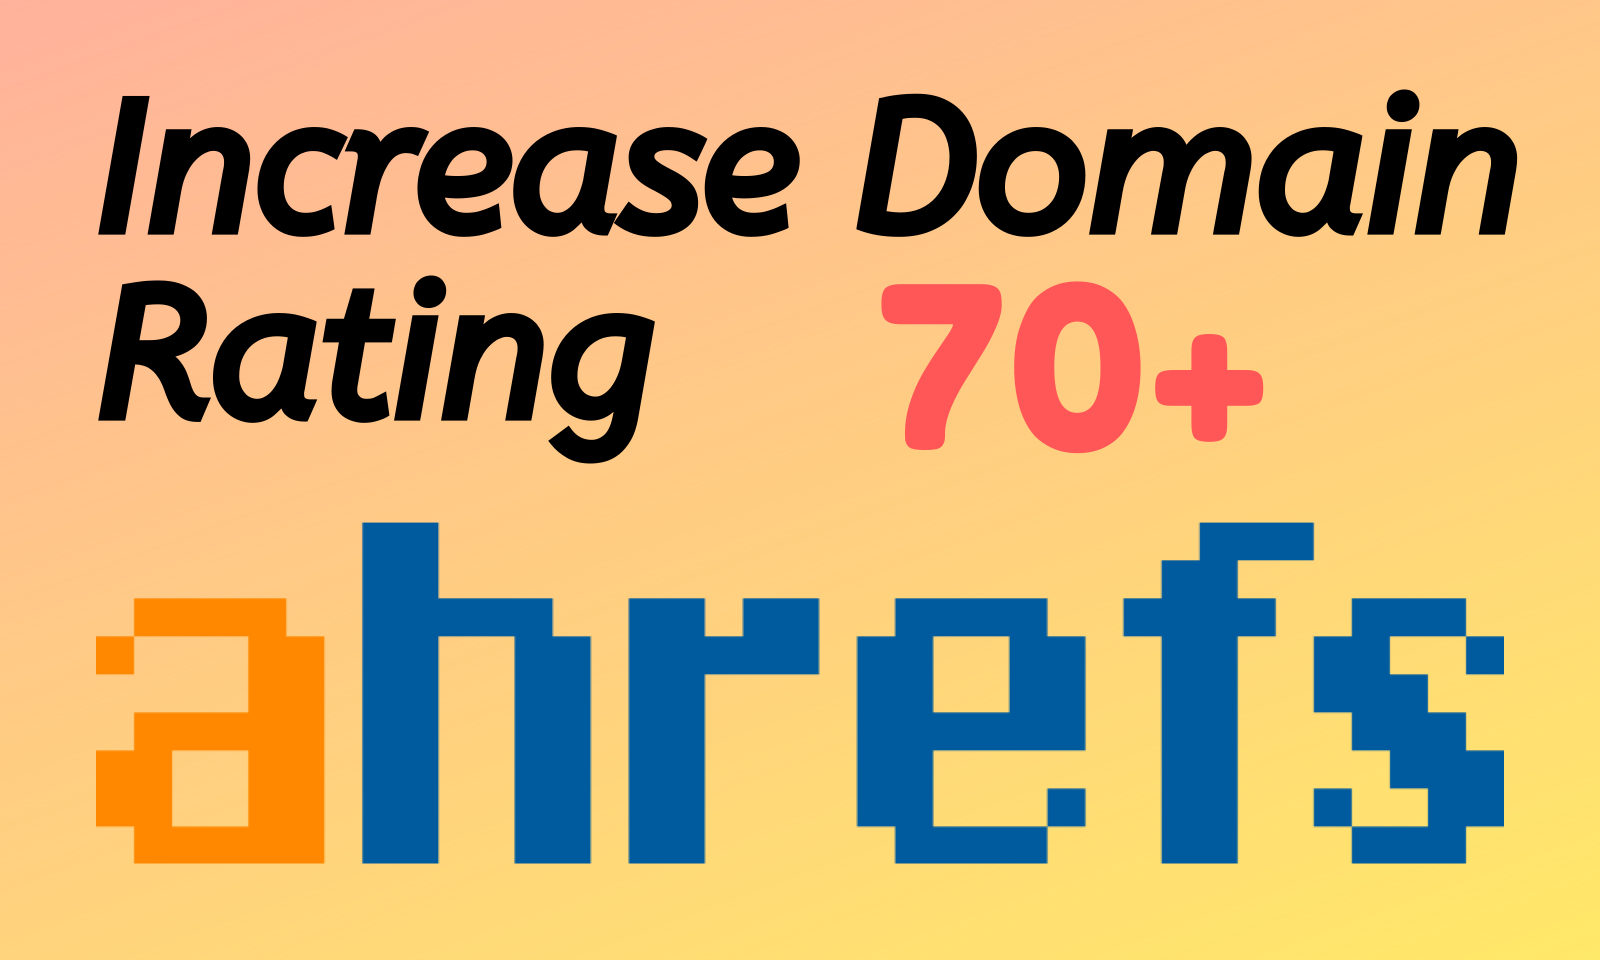 I will increase URL rating 70+ on ahrefs Spam free work